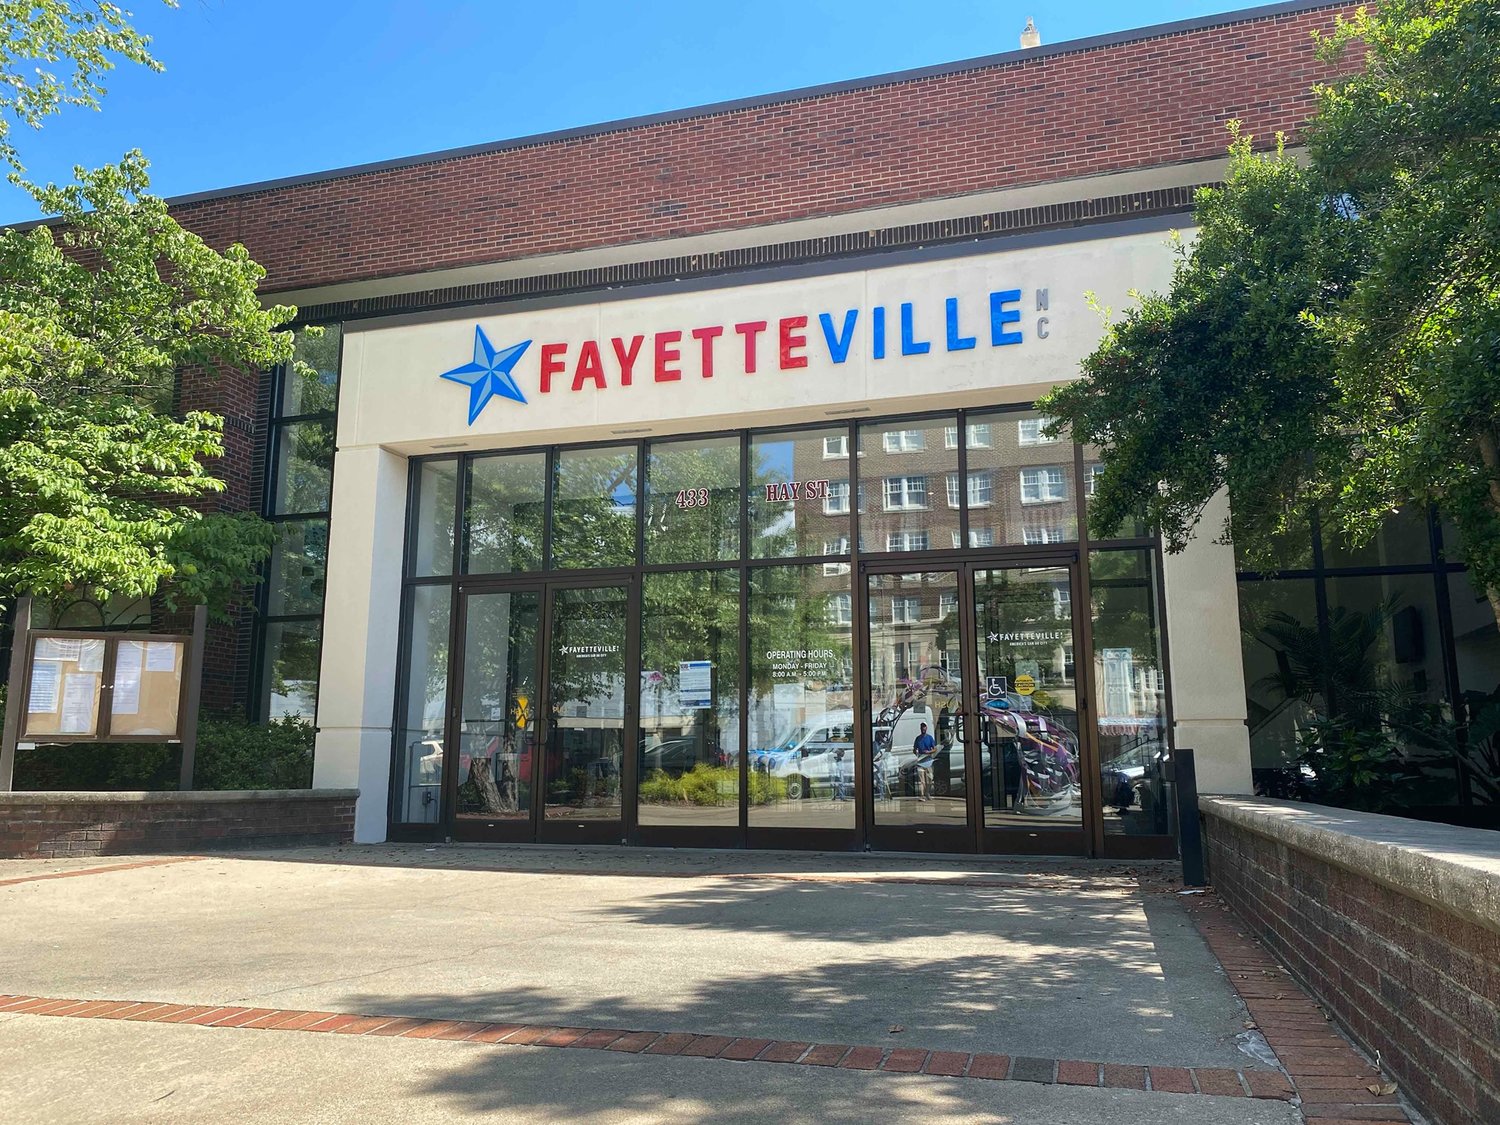 The Fayetteville City Council on Monday night adopted a resolution asking the Department of Justice to take part in the investigation of the weekend shooting death of a Fayetteville man by an off-duty deputy.